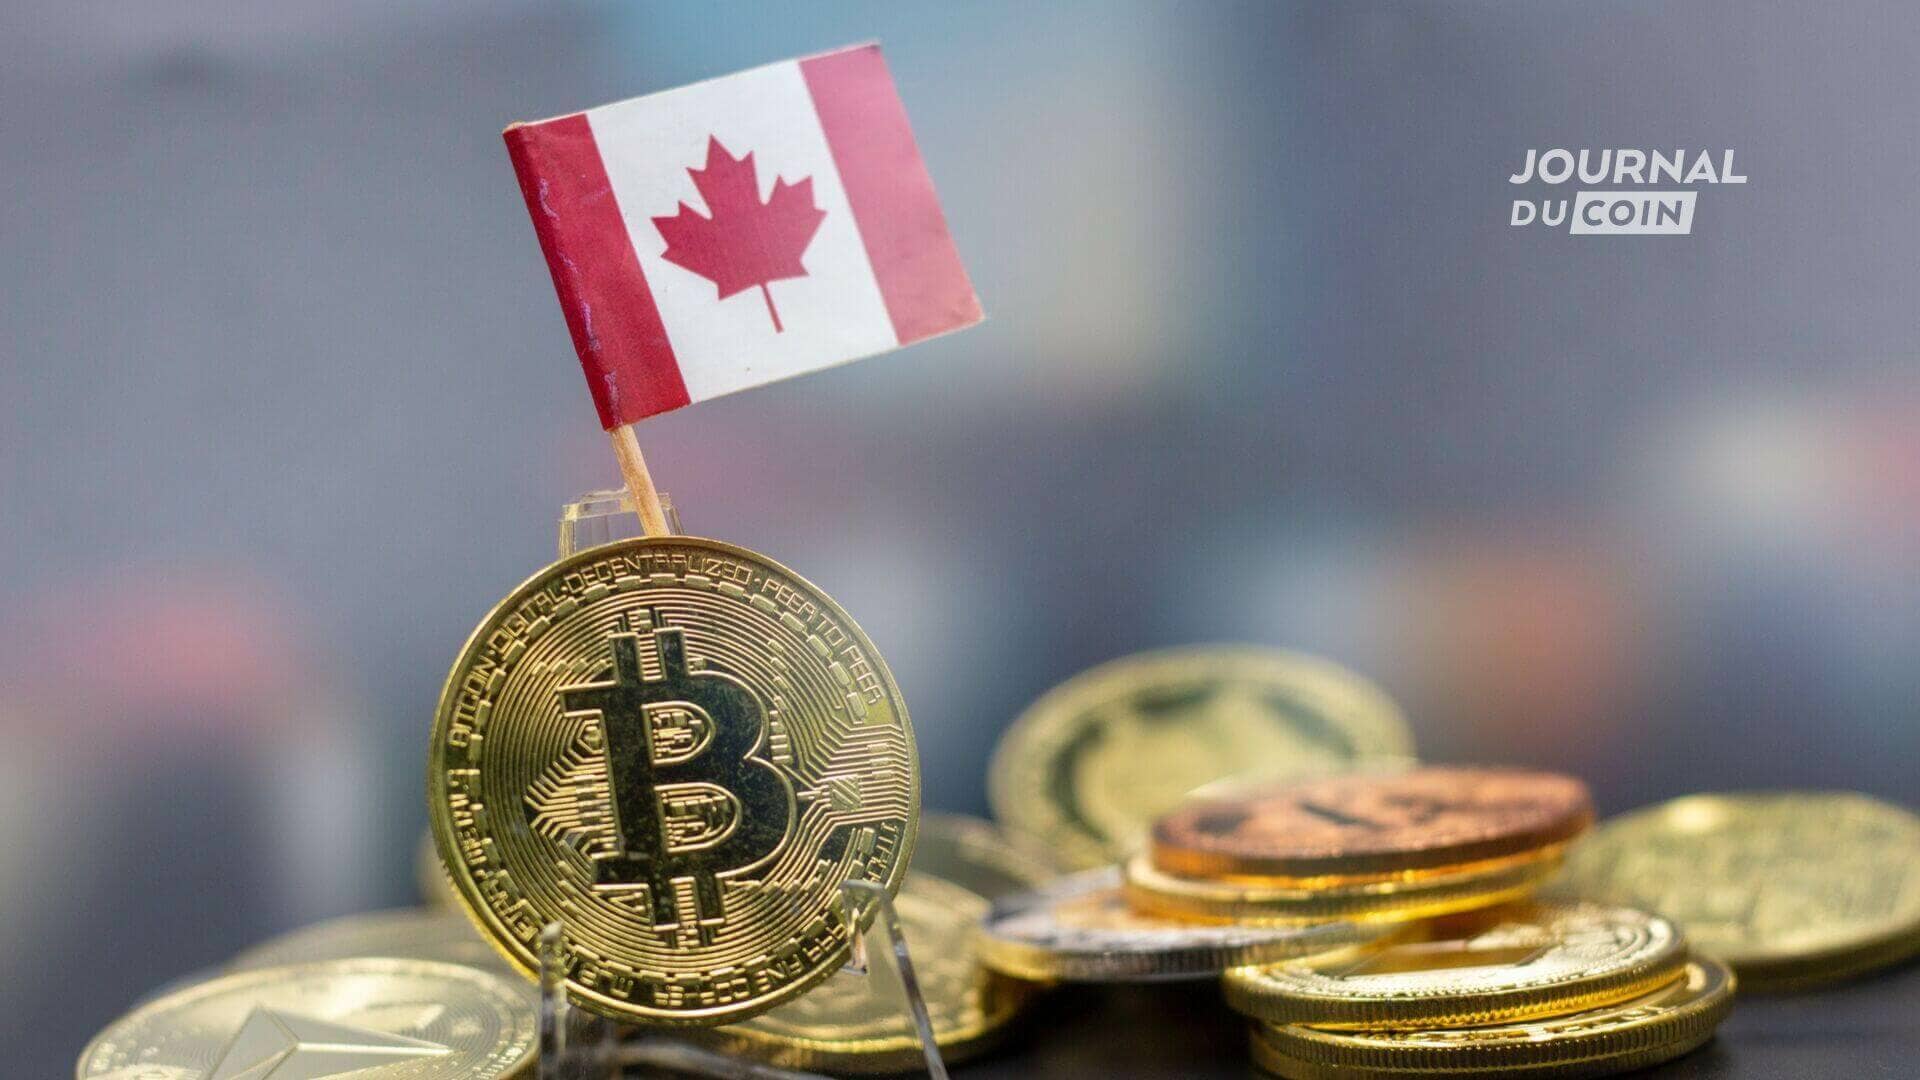 Bank of Canada on the way to a national digital currency

